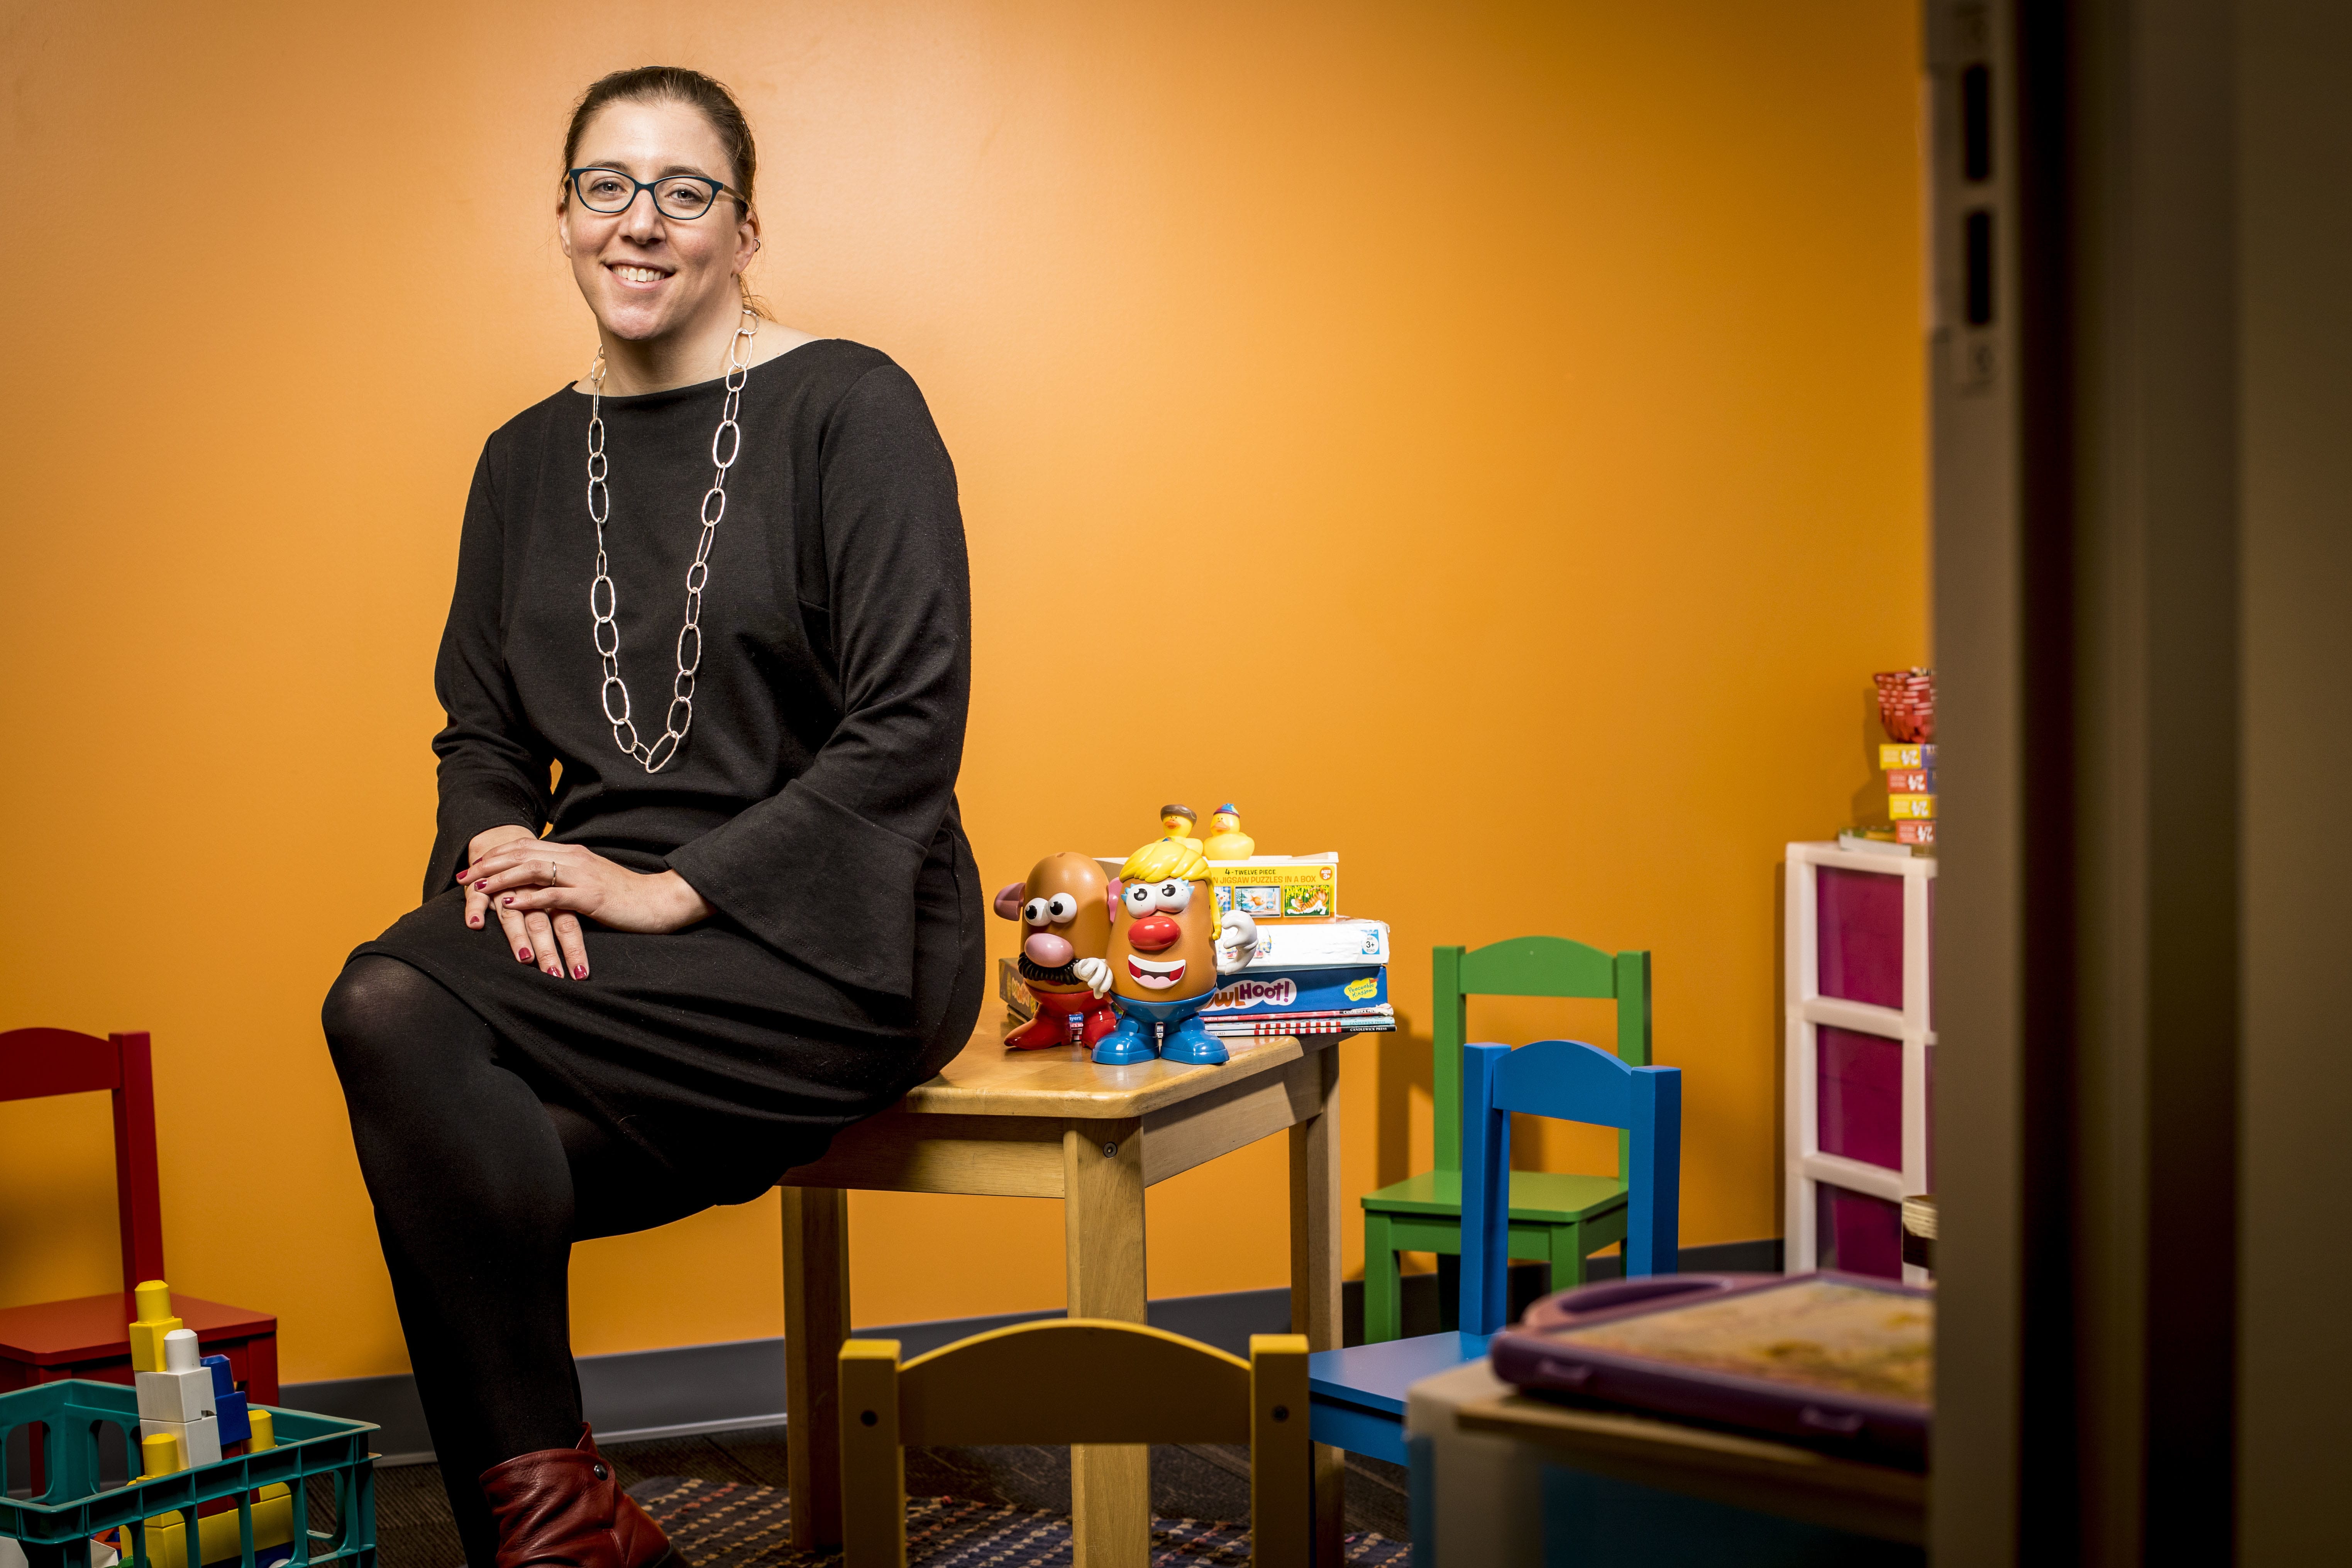 This March 2018 photo shows Kristina Olson in her laboratory in Seattle. She is the creator and leader of the TransYouth Project, which is considered the first large-scale long-term study of transgender children in the U.S. On Thursday, April 12, 2018, Olson was named winner of the NSF's annual Alan T. Waterman Award, the government's highest honor for scientists still in the early phases of their careers.